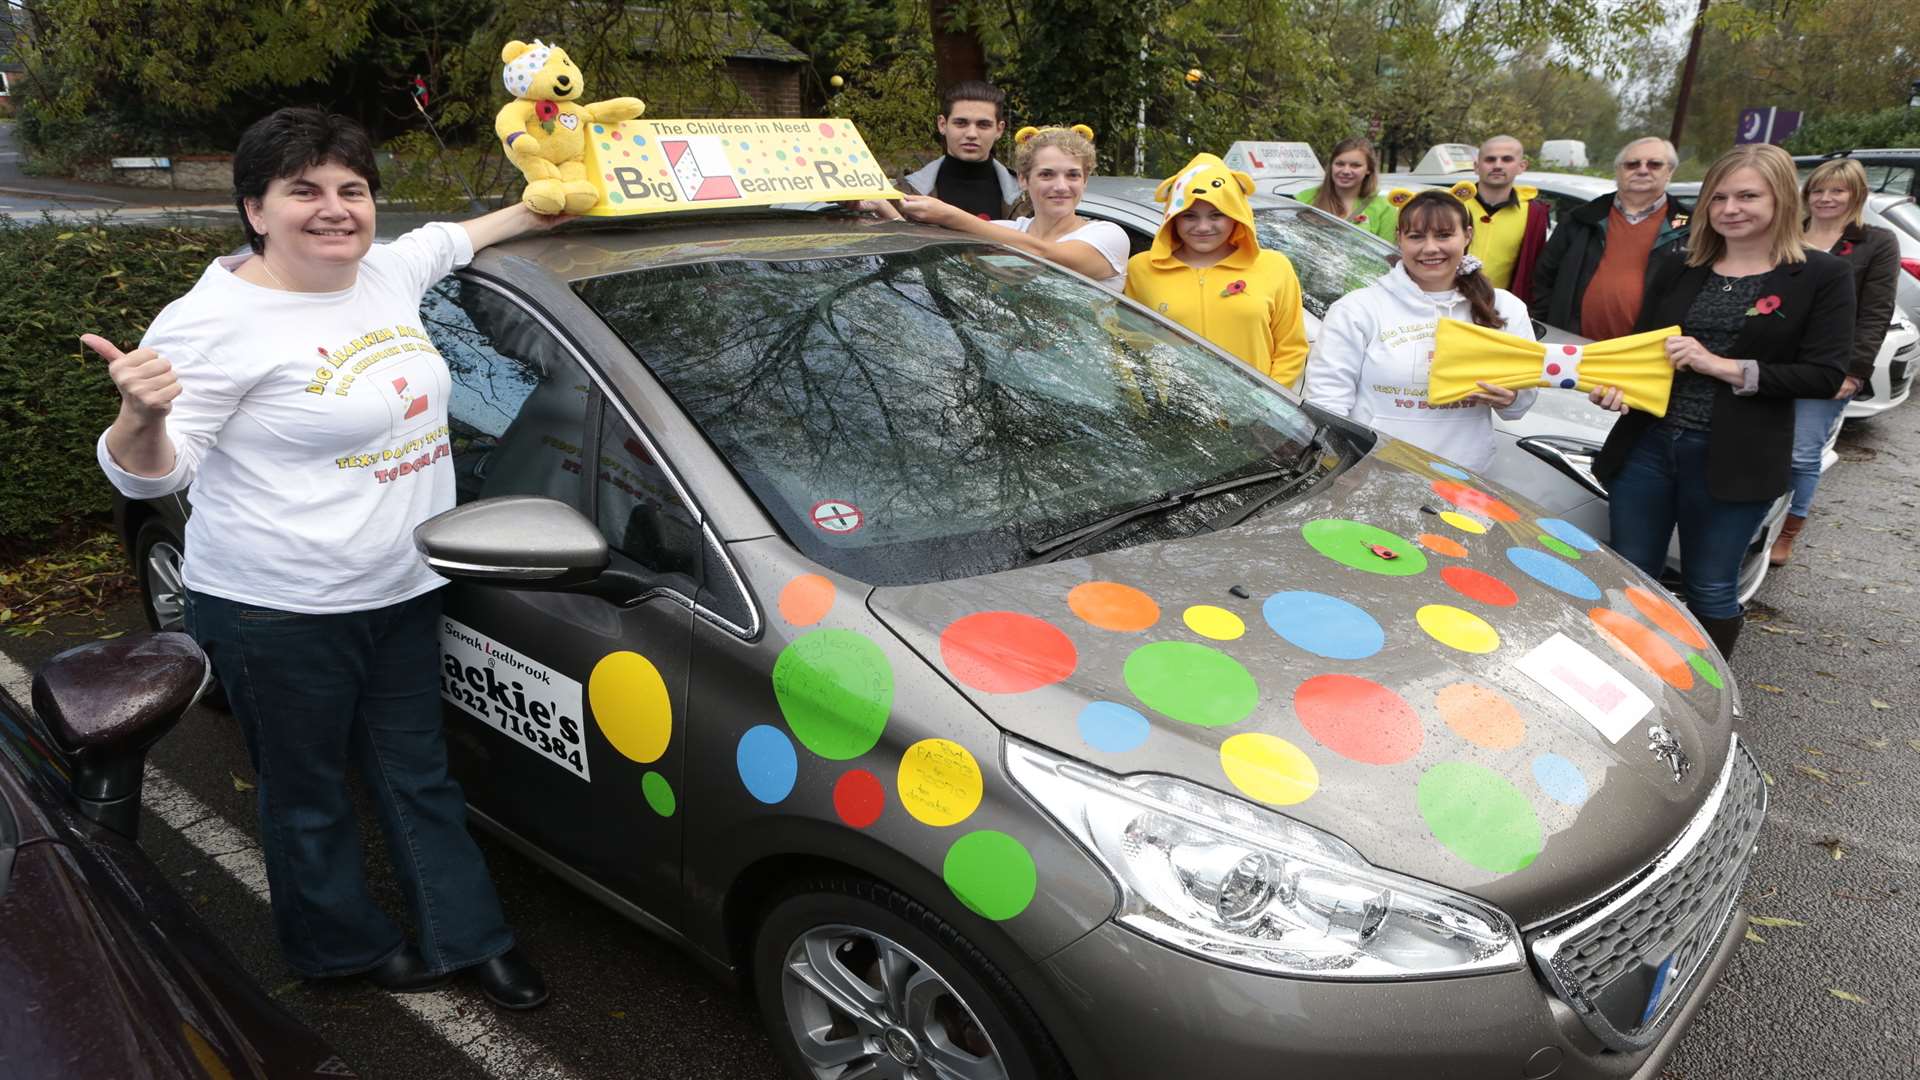 Sarah Ladbrook and Wendy O'Kill with the brightly decorated learner car in aid of Children in Need